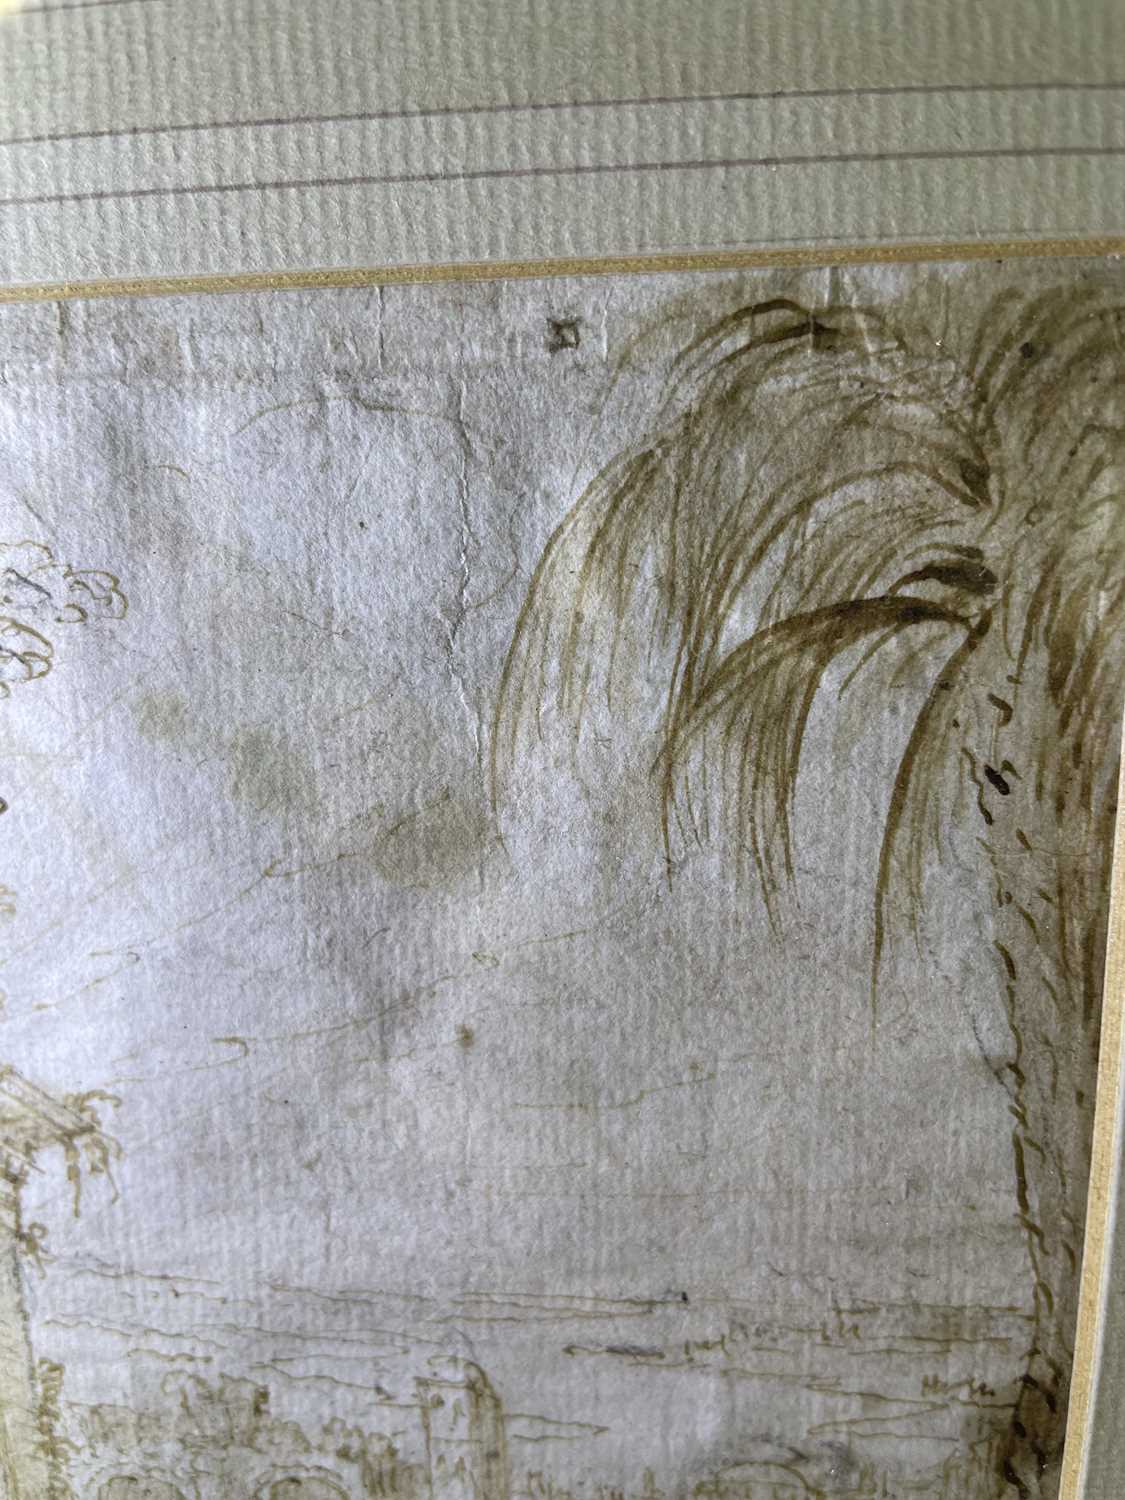 M *Arasser (17th/18th Century) Pyramus and Thisbe Signed and inscribed "Roma", brown ink and pencil, - Image 11 of 23